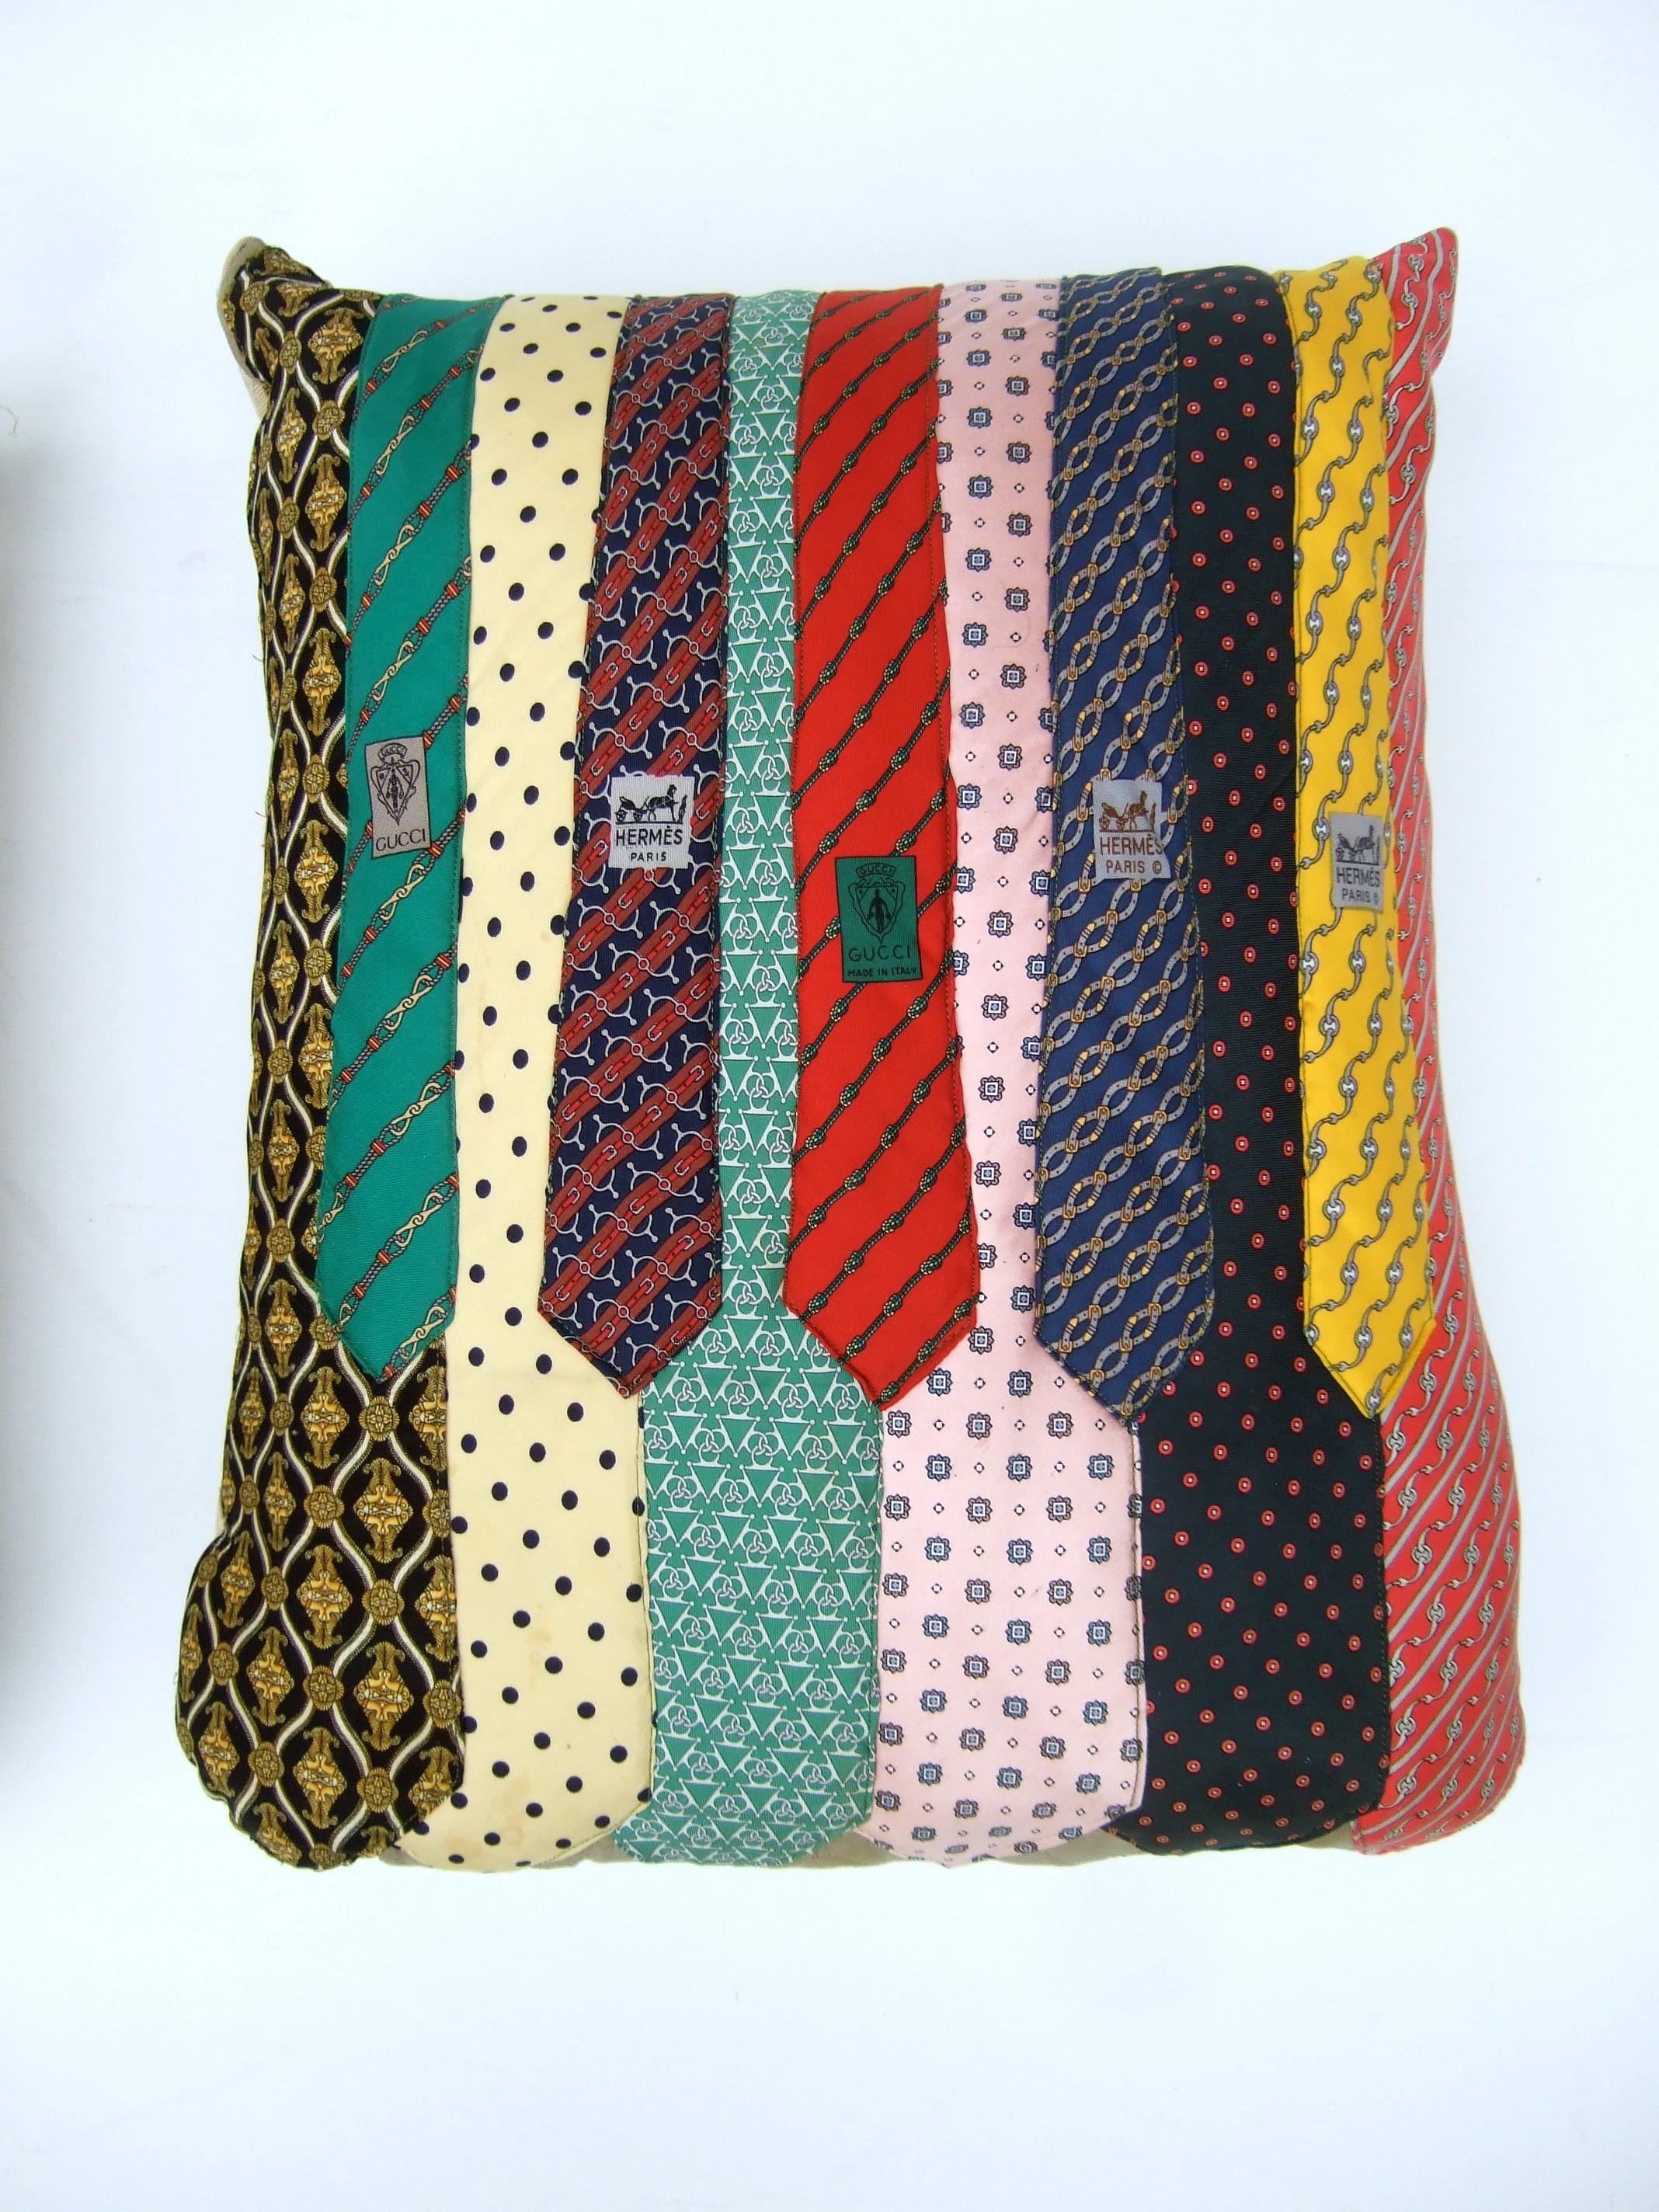 Pair of Vintage Hermes & Gucci Silk Necktie Up-cycled Handmade Pillows c 1980s  In Good Condition For Sale In University City, MO